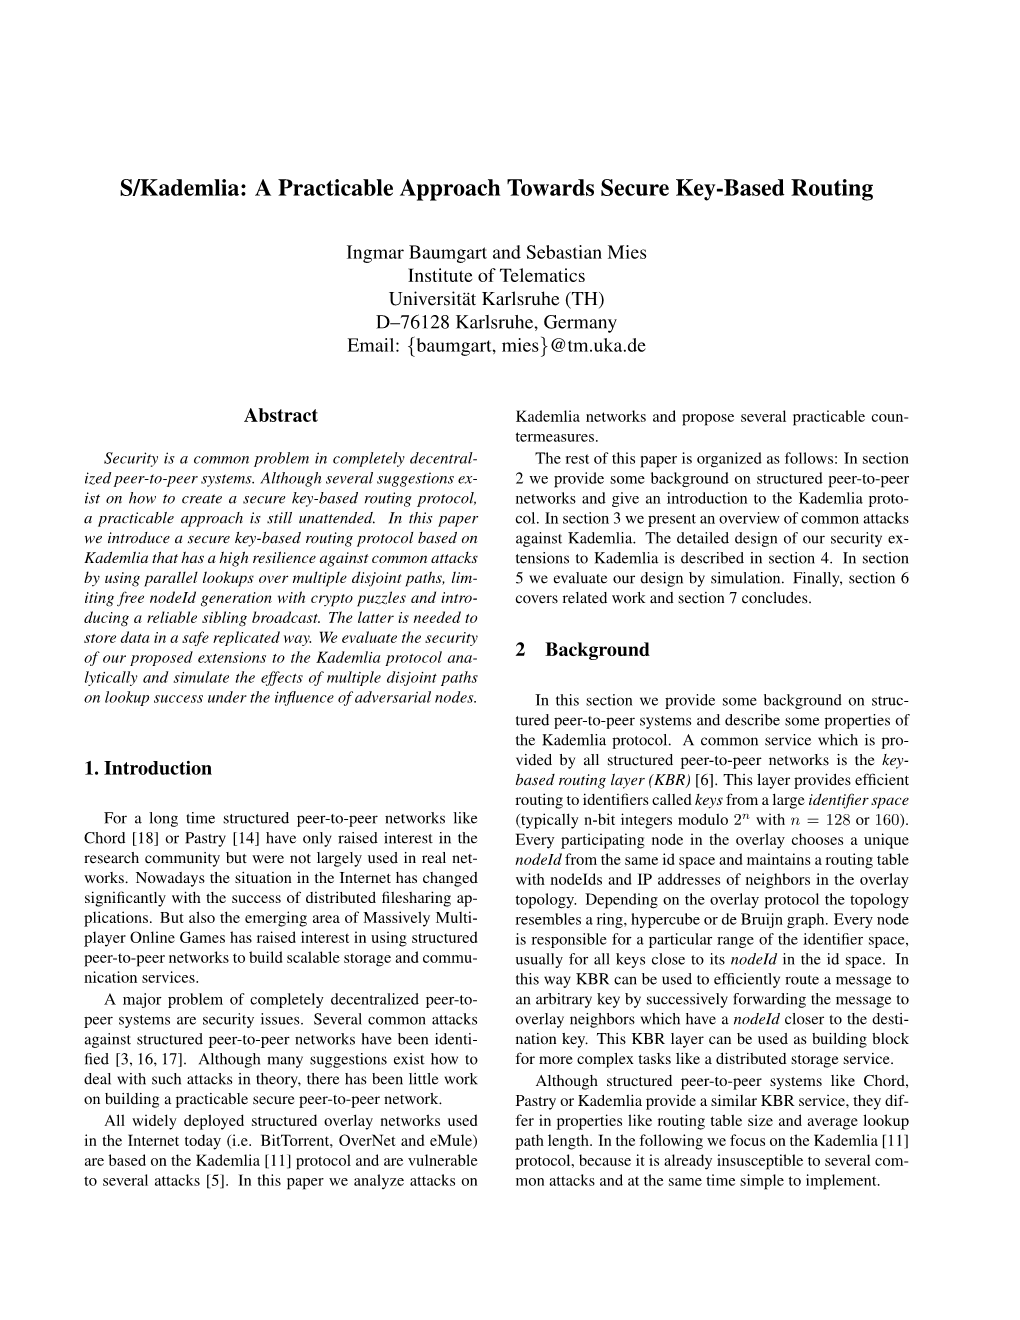 S/Kademlia: a Practicable Approach Towards Secure Key-Based Routing